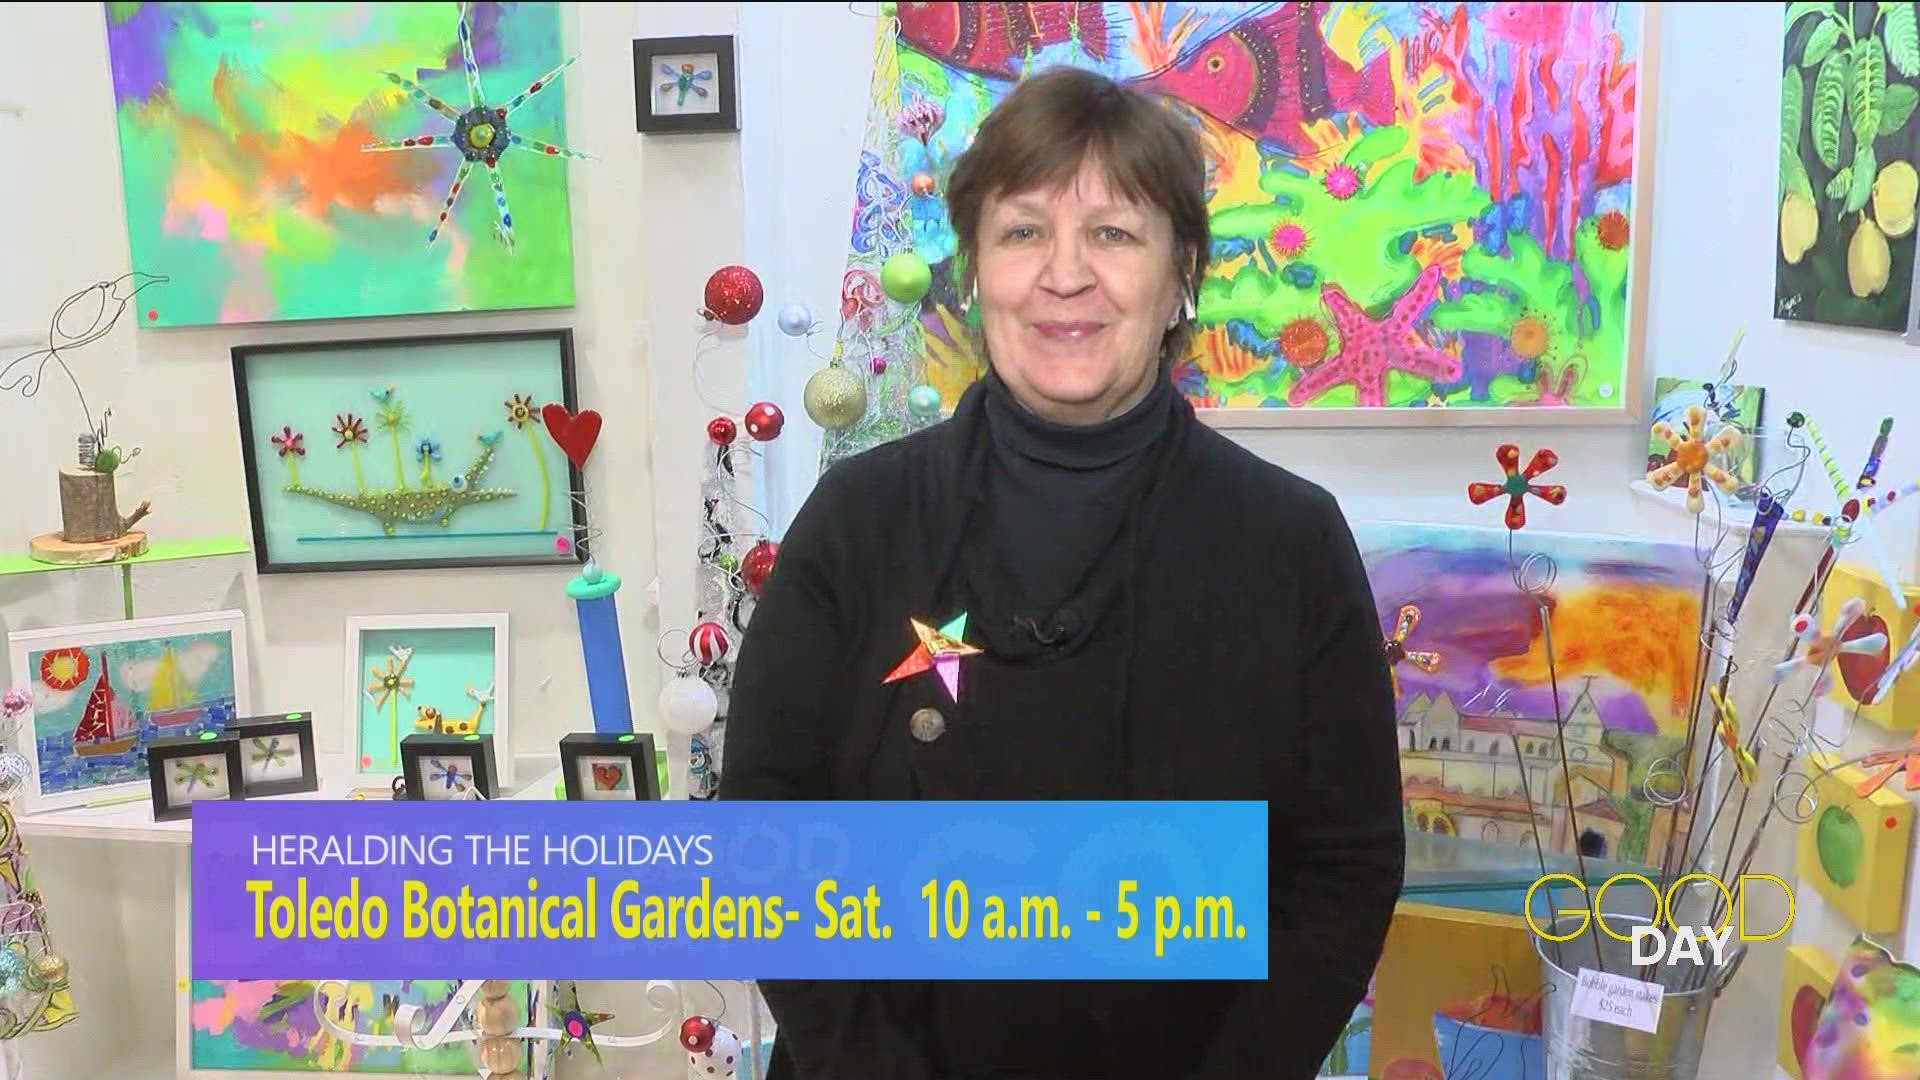 Lori Schoen with Unruly Arts talks an art show featuring local artists this Friday through Sunday at the Toledo Botanical Gardens.